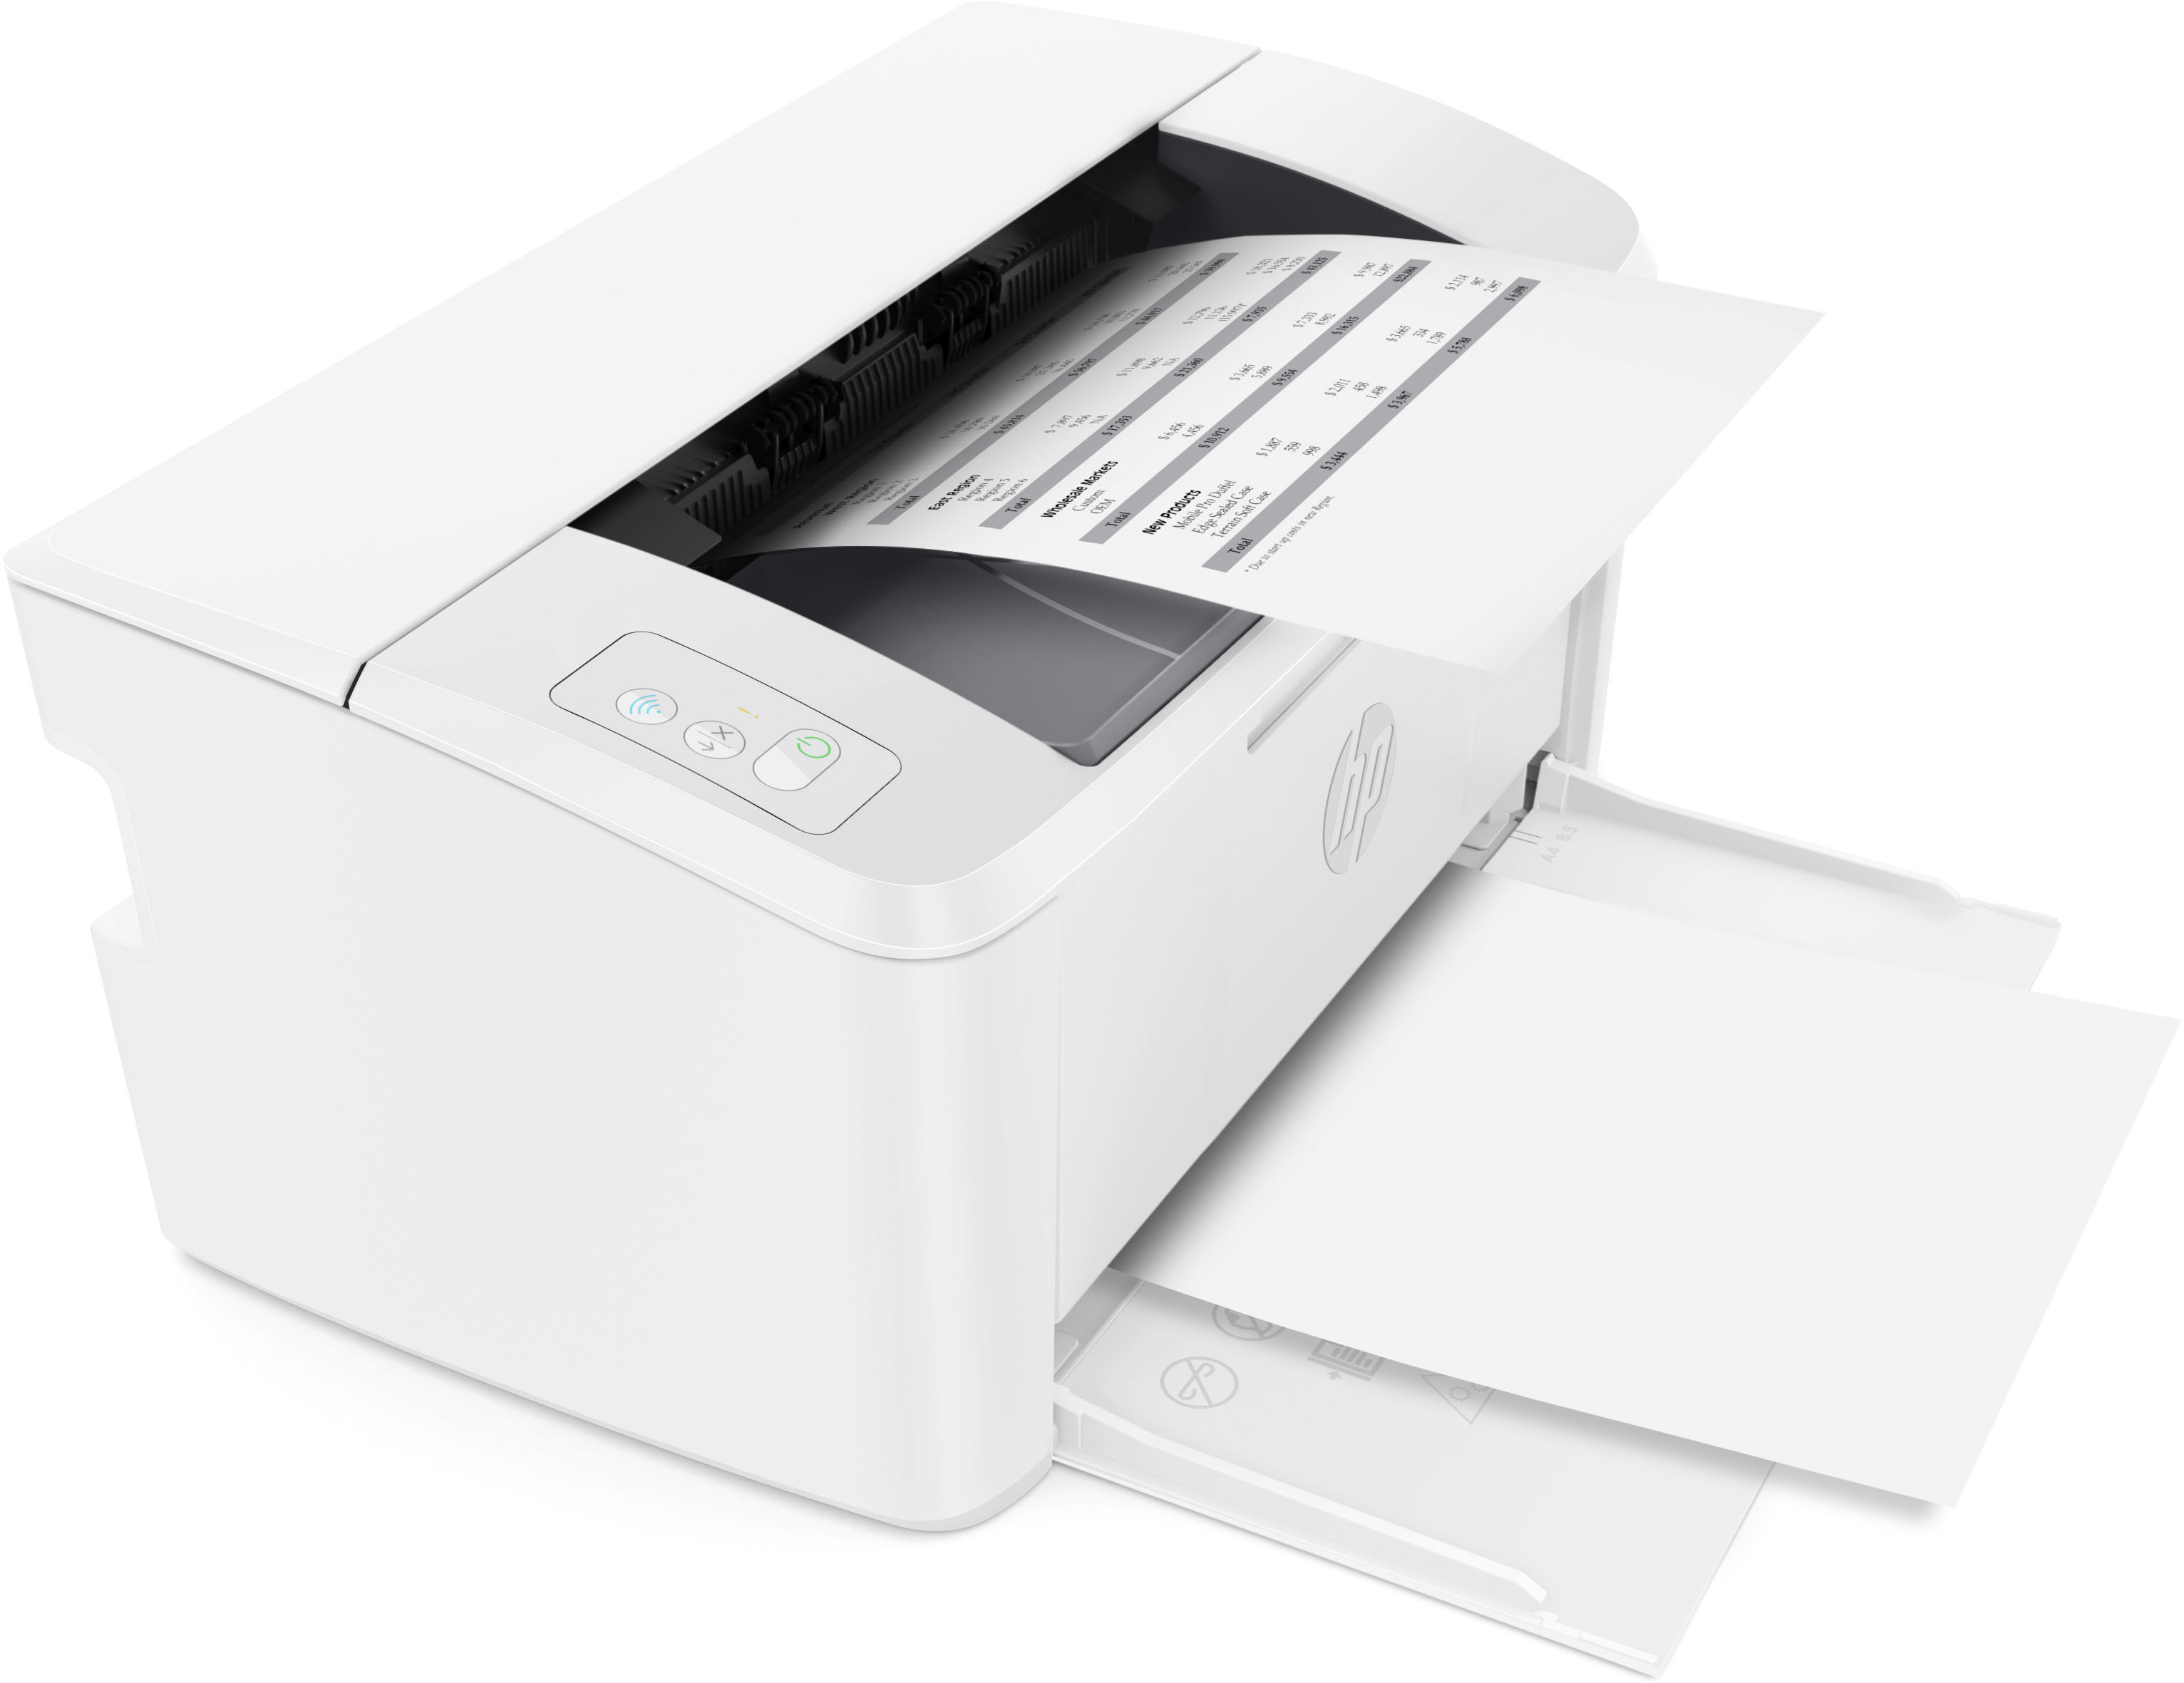 HP LaserJet M110we White LaserJet M110we of Laser included Buy Wireless with - Black White Best months Ink 6 Instant Printer with and HP